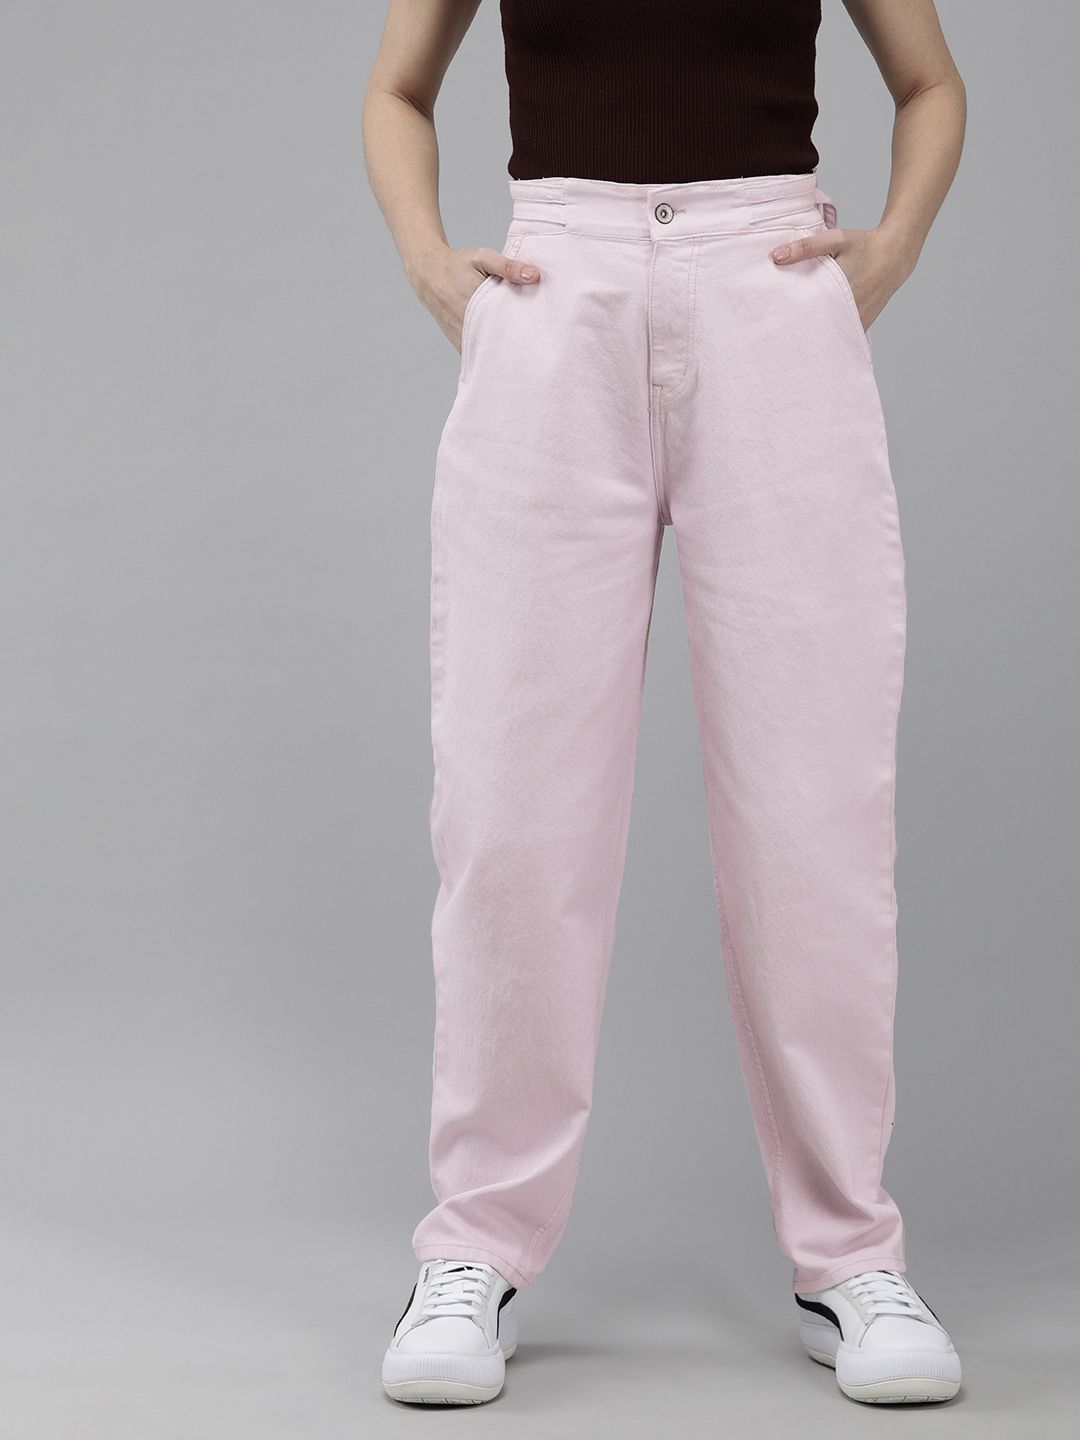 Roadster Women Pink Straight Fit Stretchable Jeans Price in India